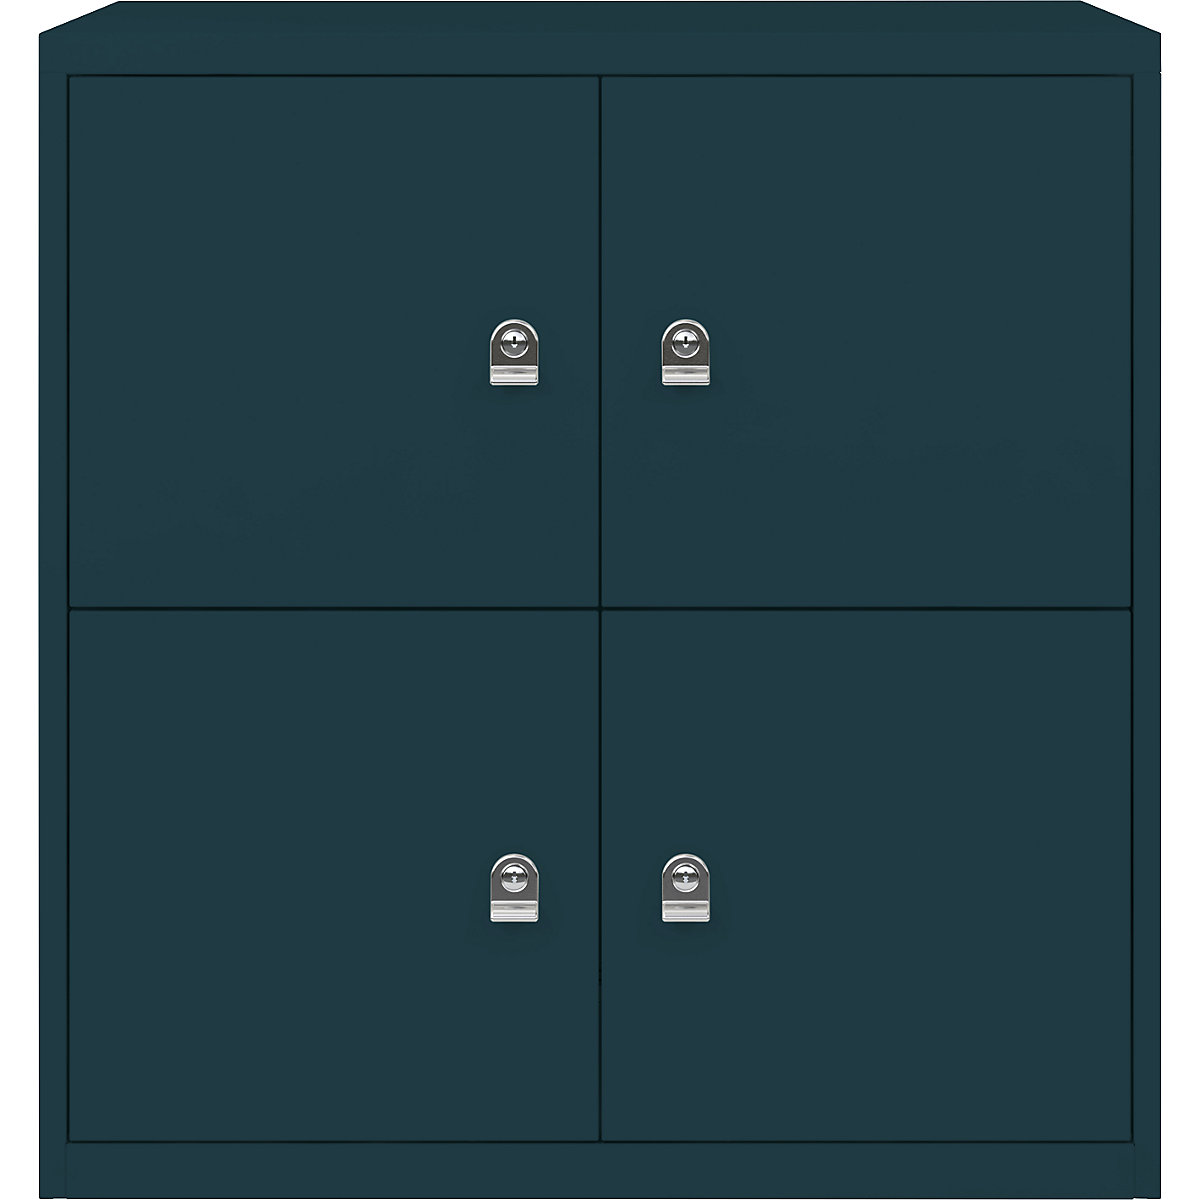 BISLEY – LateralFile™ lodge, with 4 lockable compartments, height 375 mm each, ocean